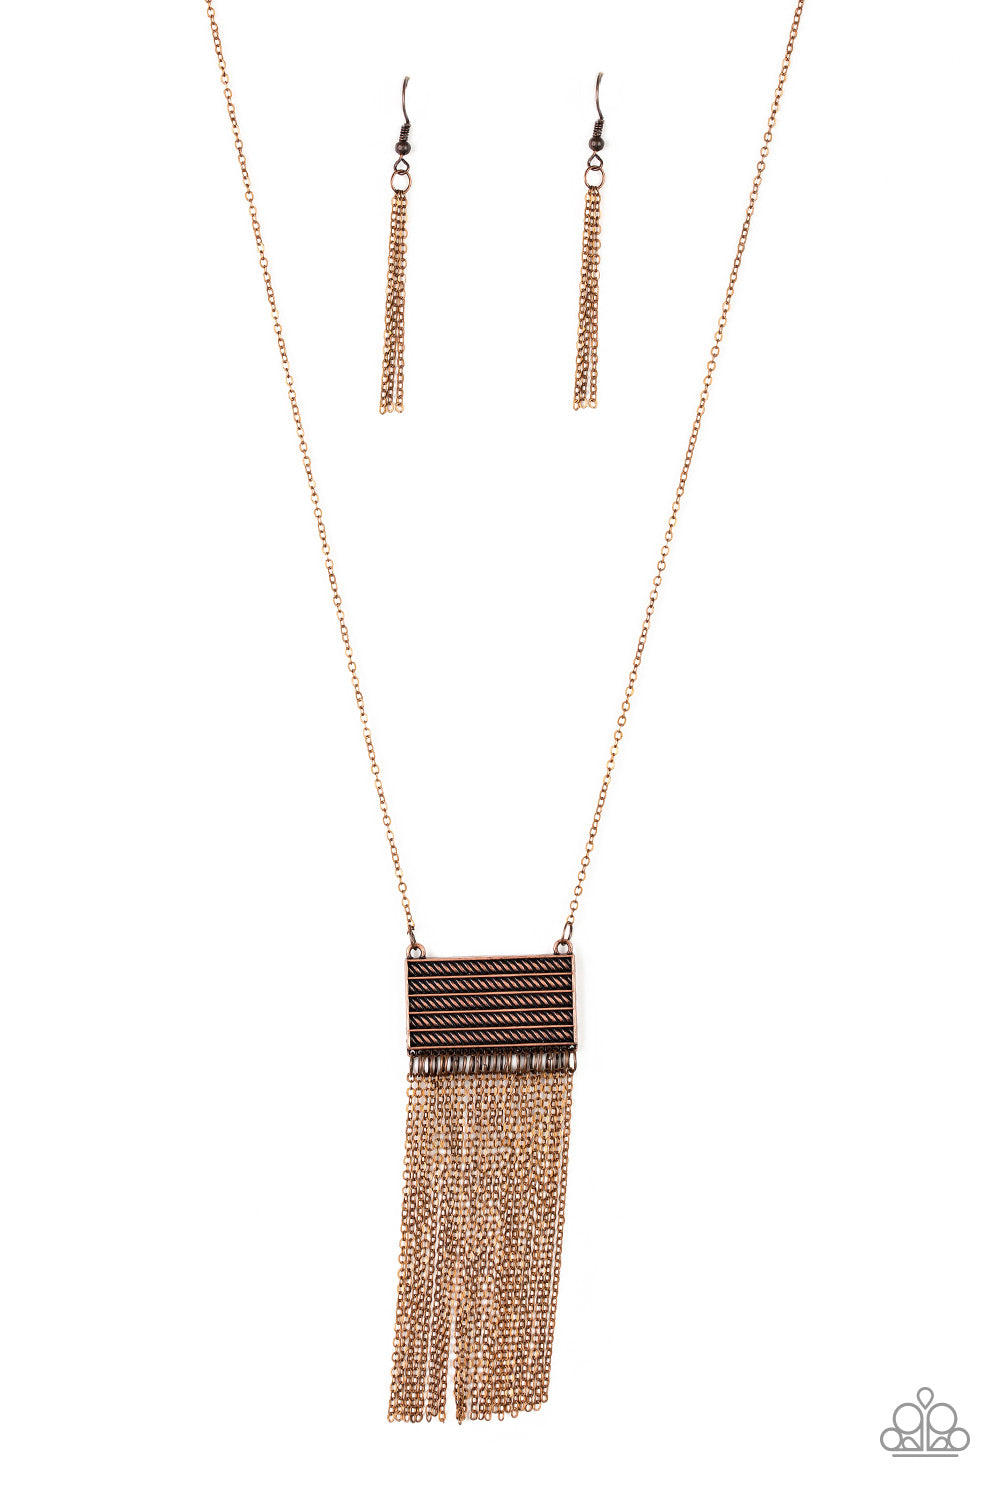 Totally Tassel Paparazzi Accessories Necklace with Earrings Copper